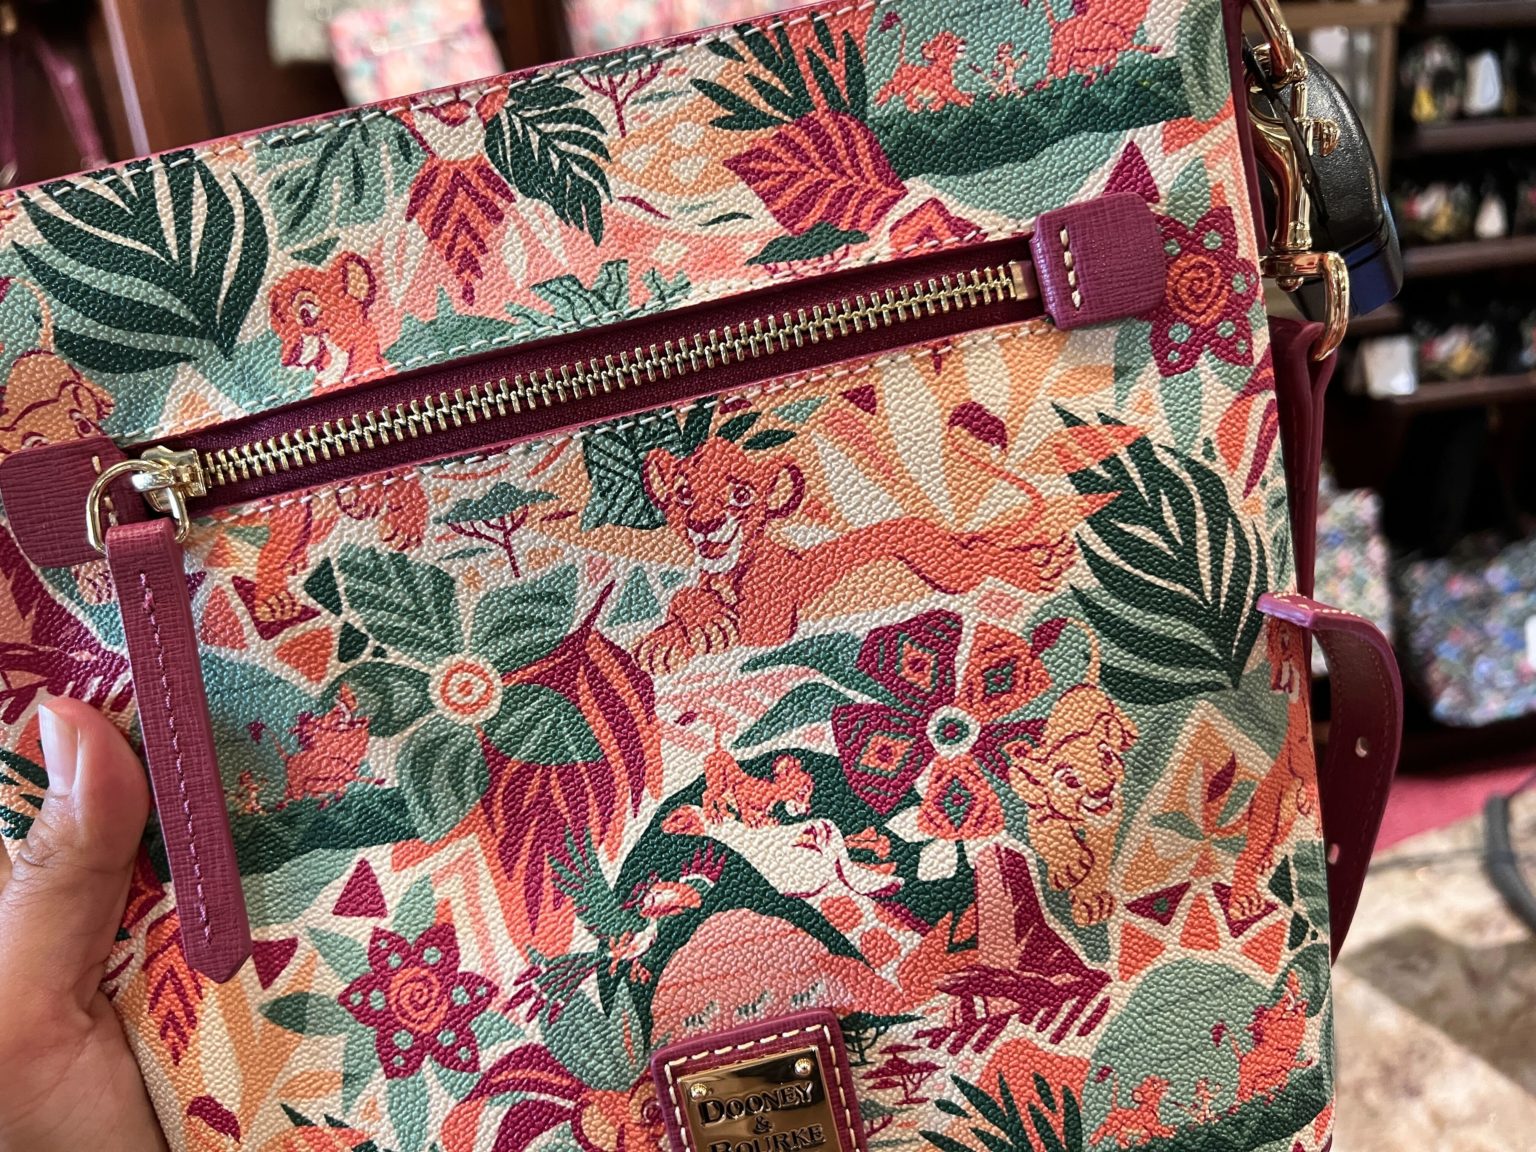 New Lion King Dooney & Bourke Collection Spotted at Magic Kingdom